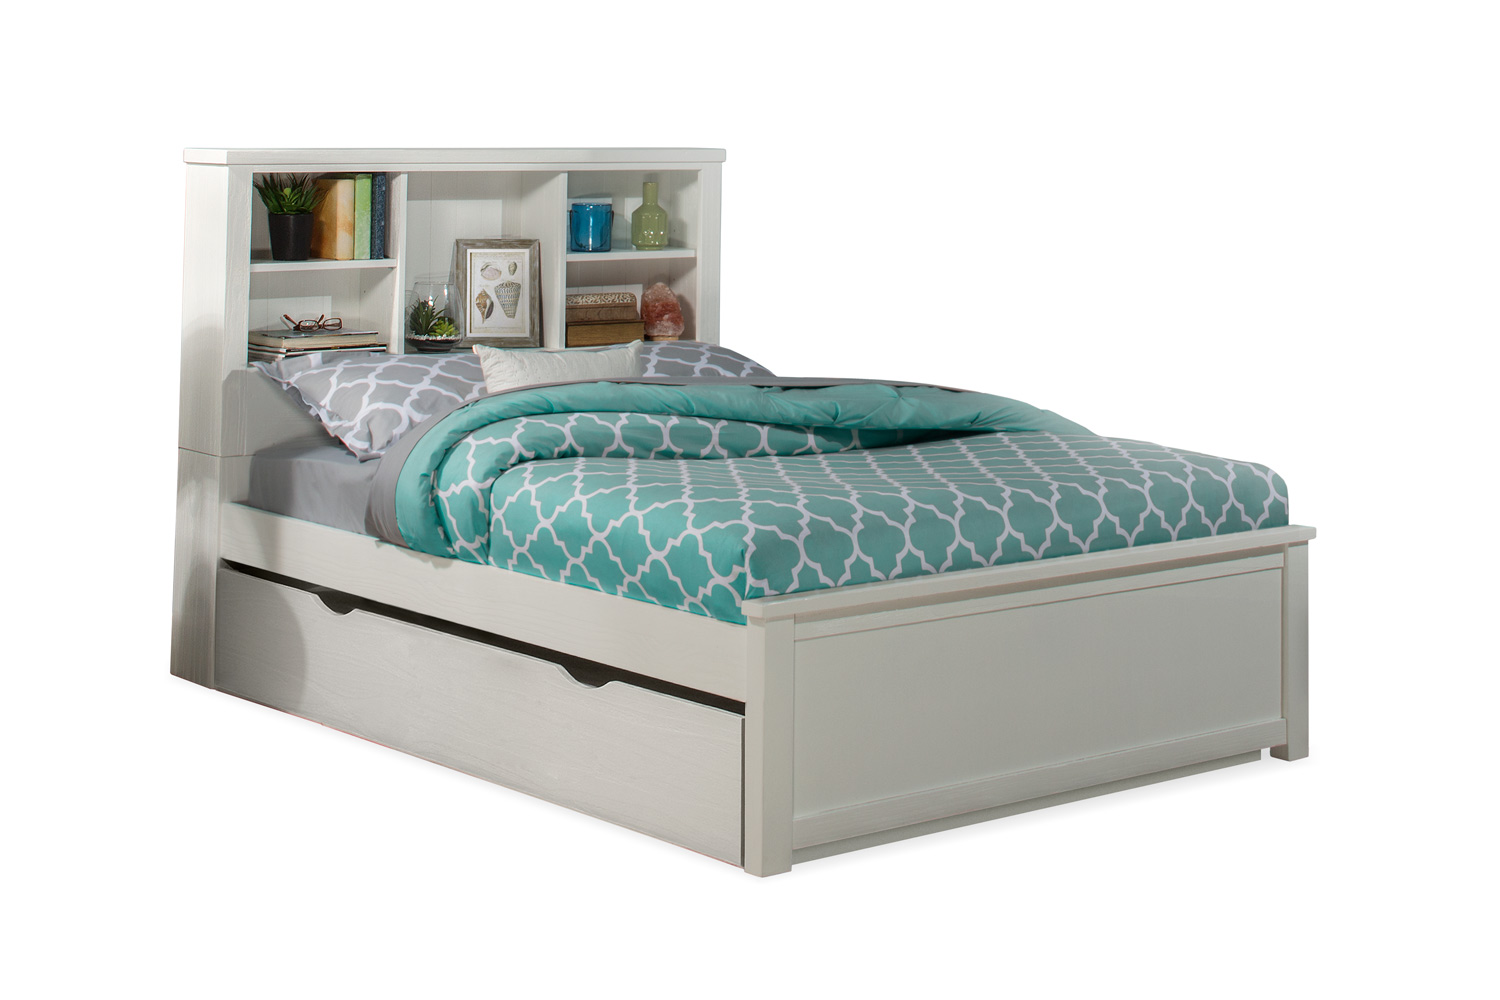 NE Kids Highlands Bookcase Bed with Trundle - White